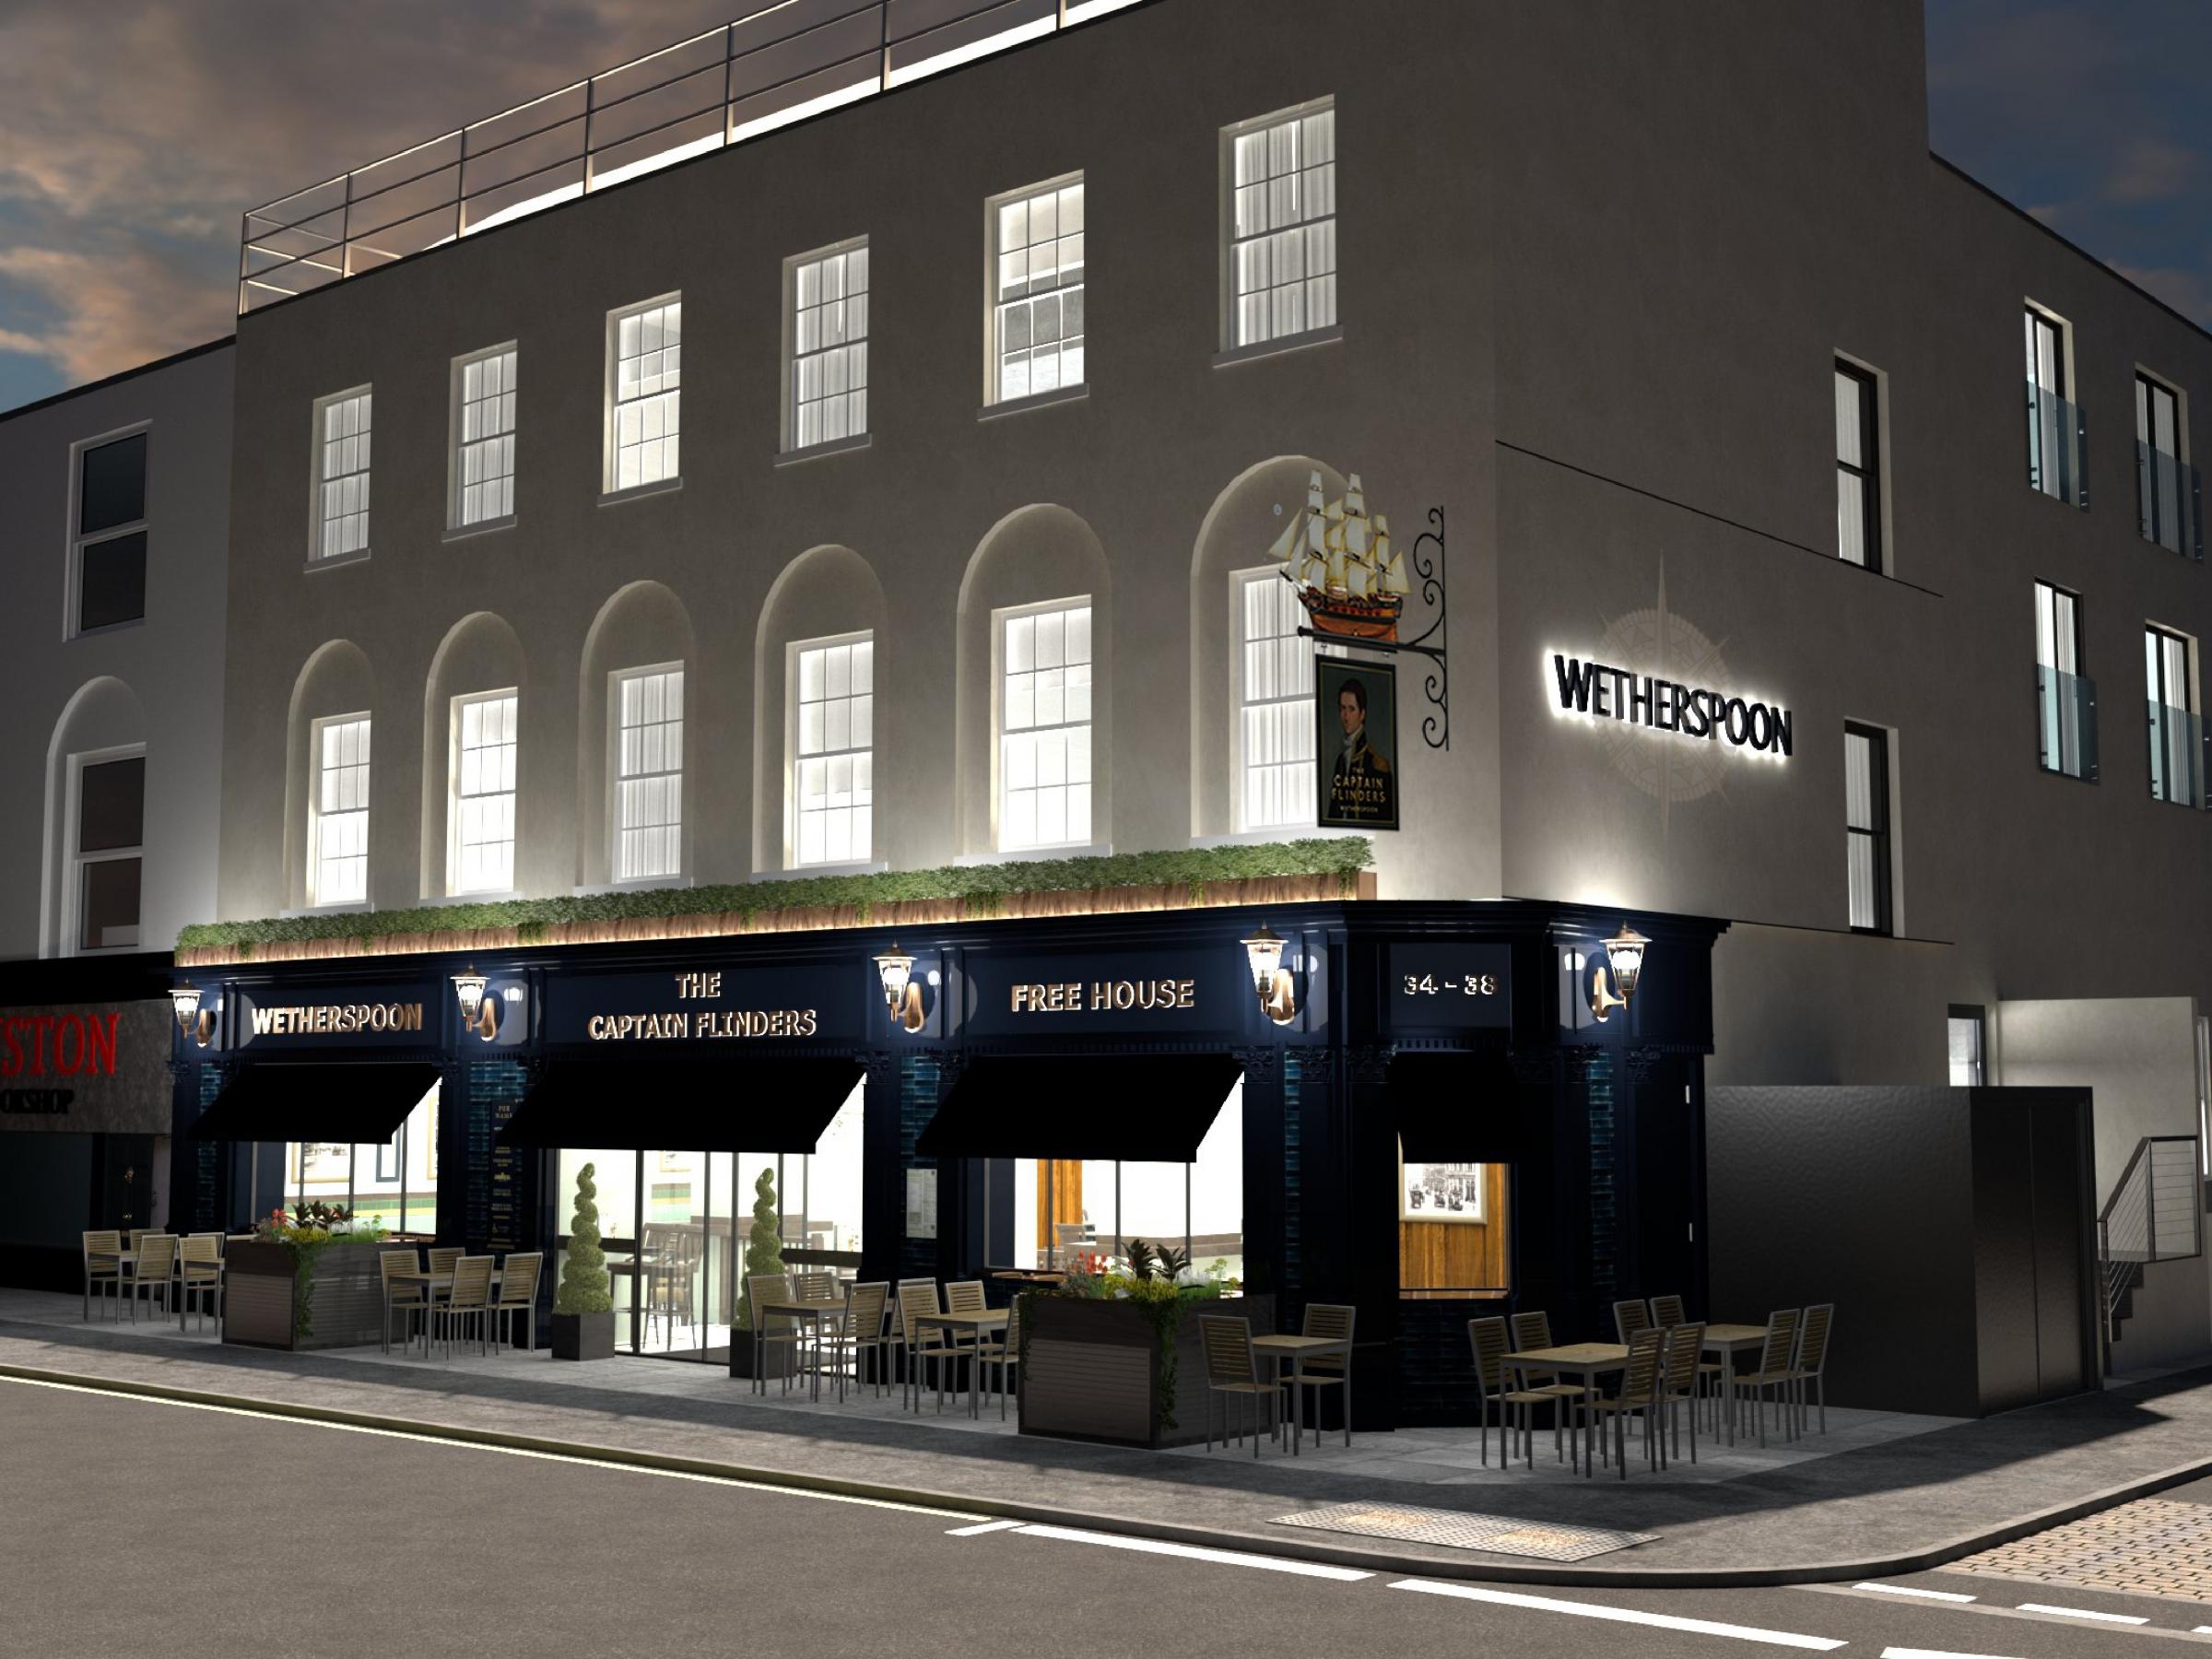  An artists impression of The Captain Flinders in Eversholt Street, Euston. Photo: DV Architects